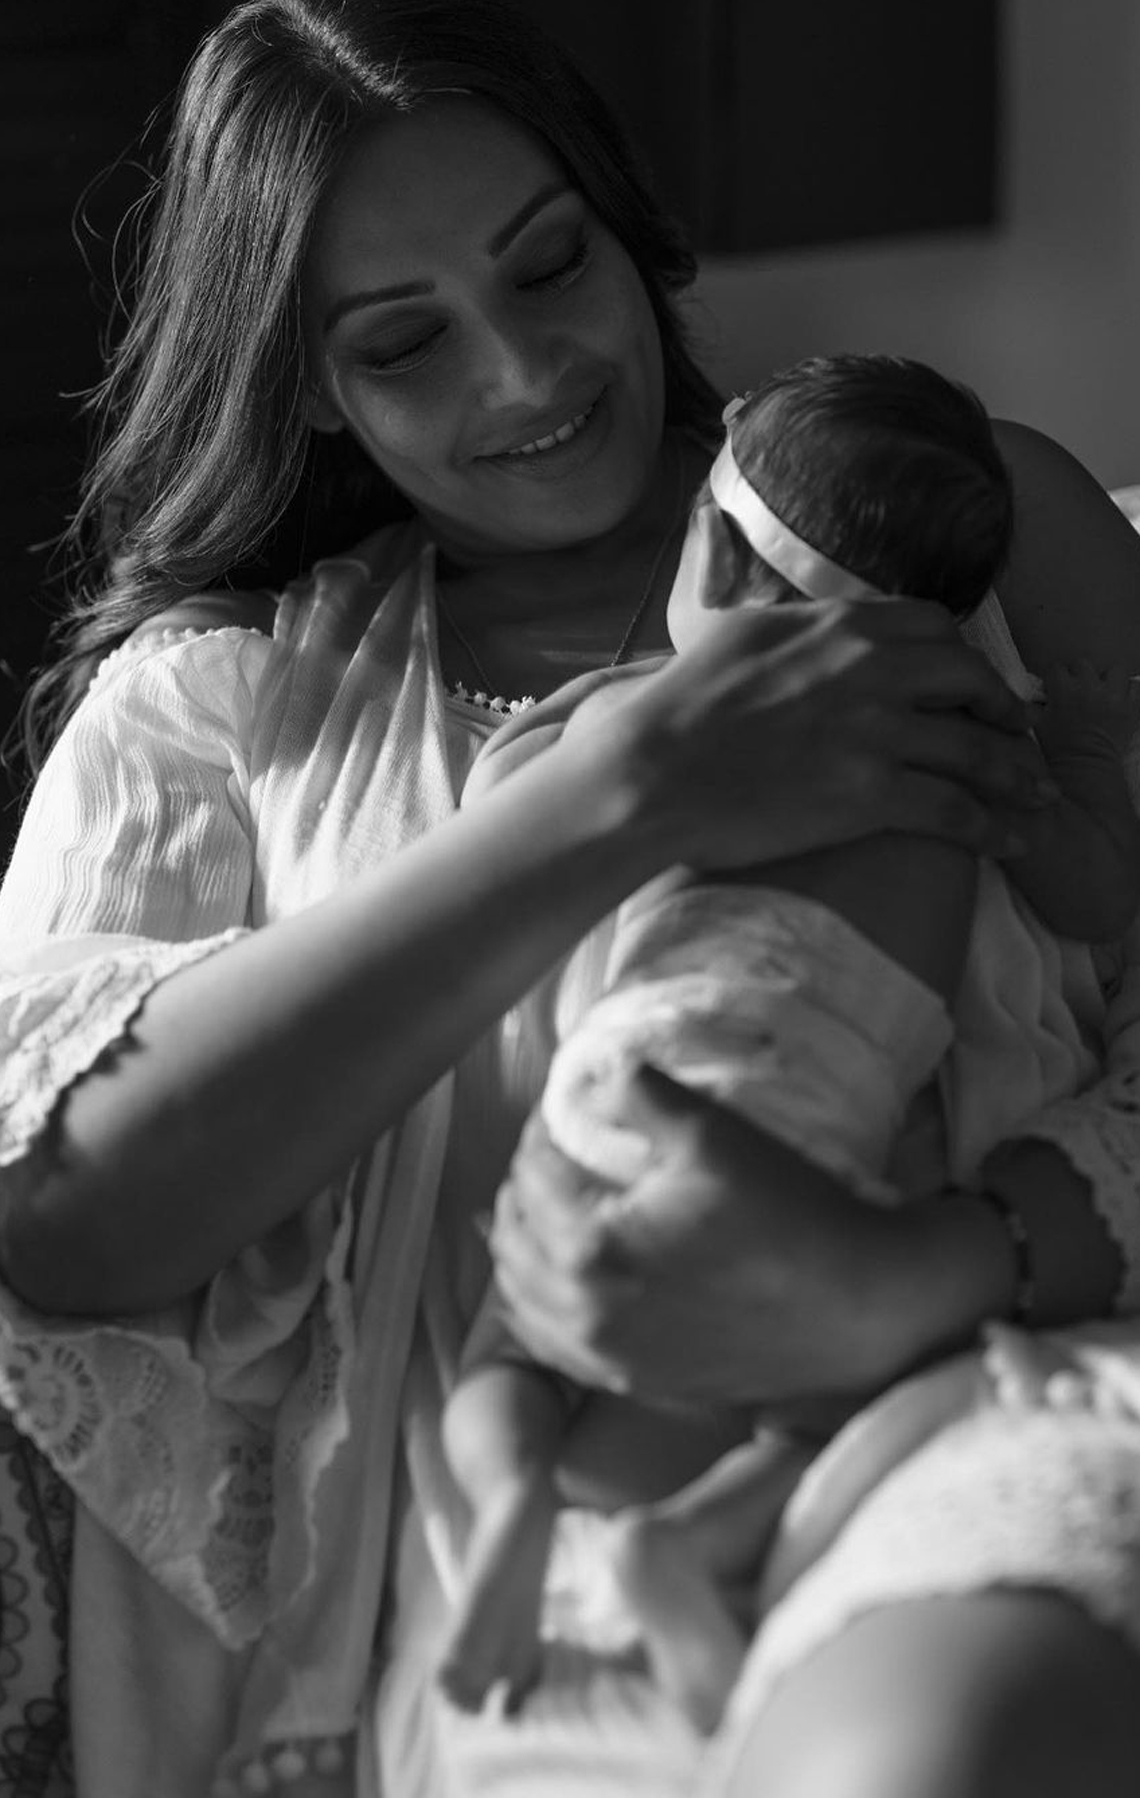 Bipasha Basu certainly loves spending time with her daughter